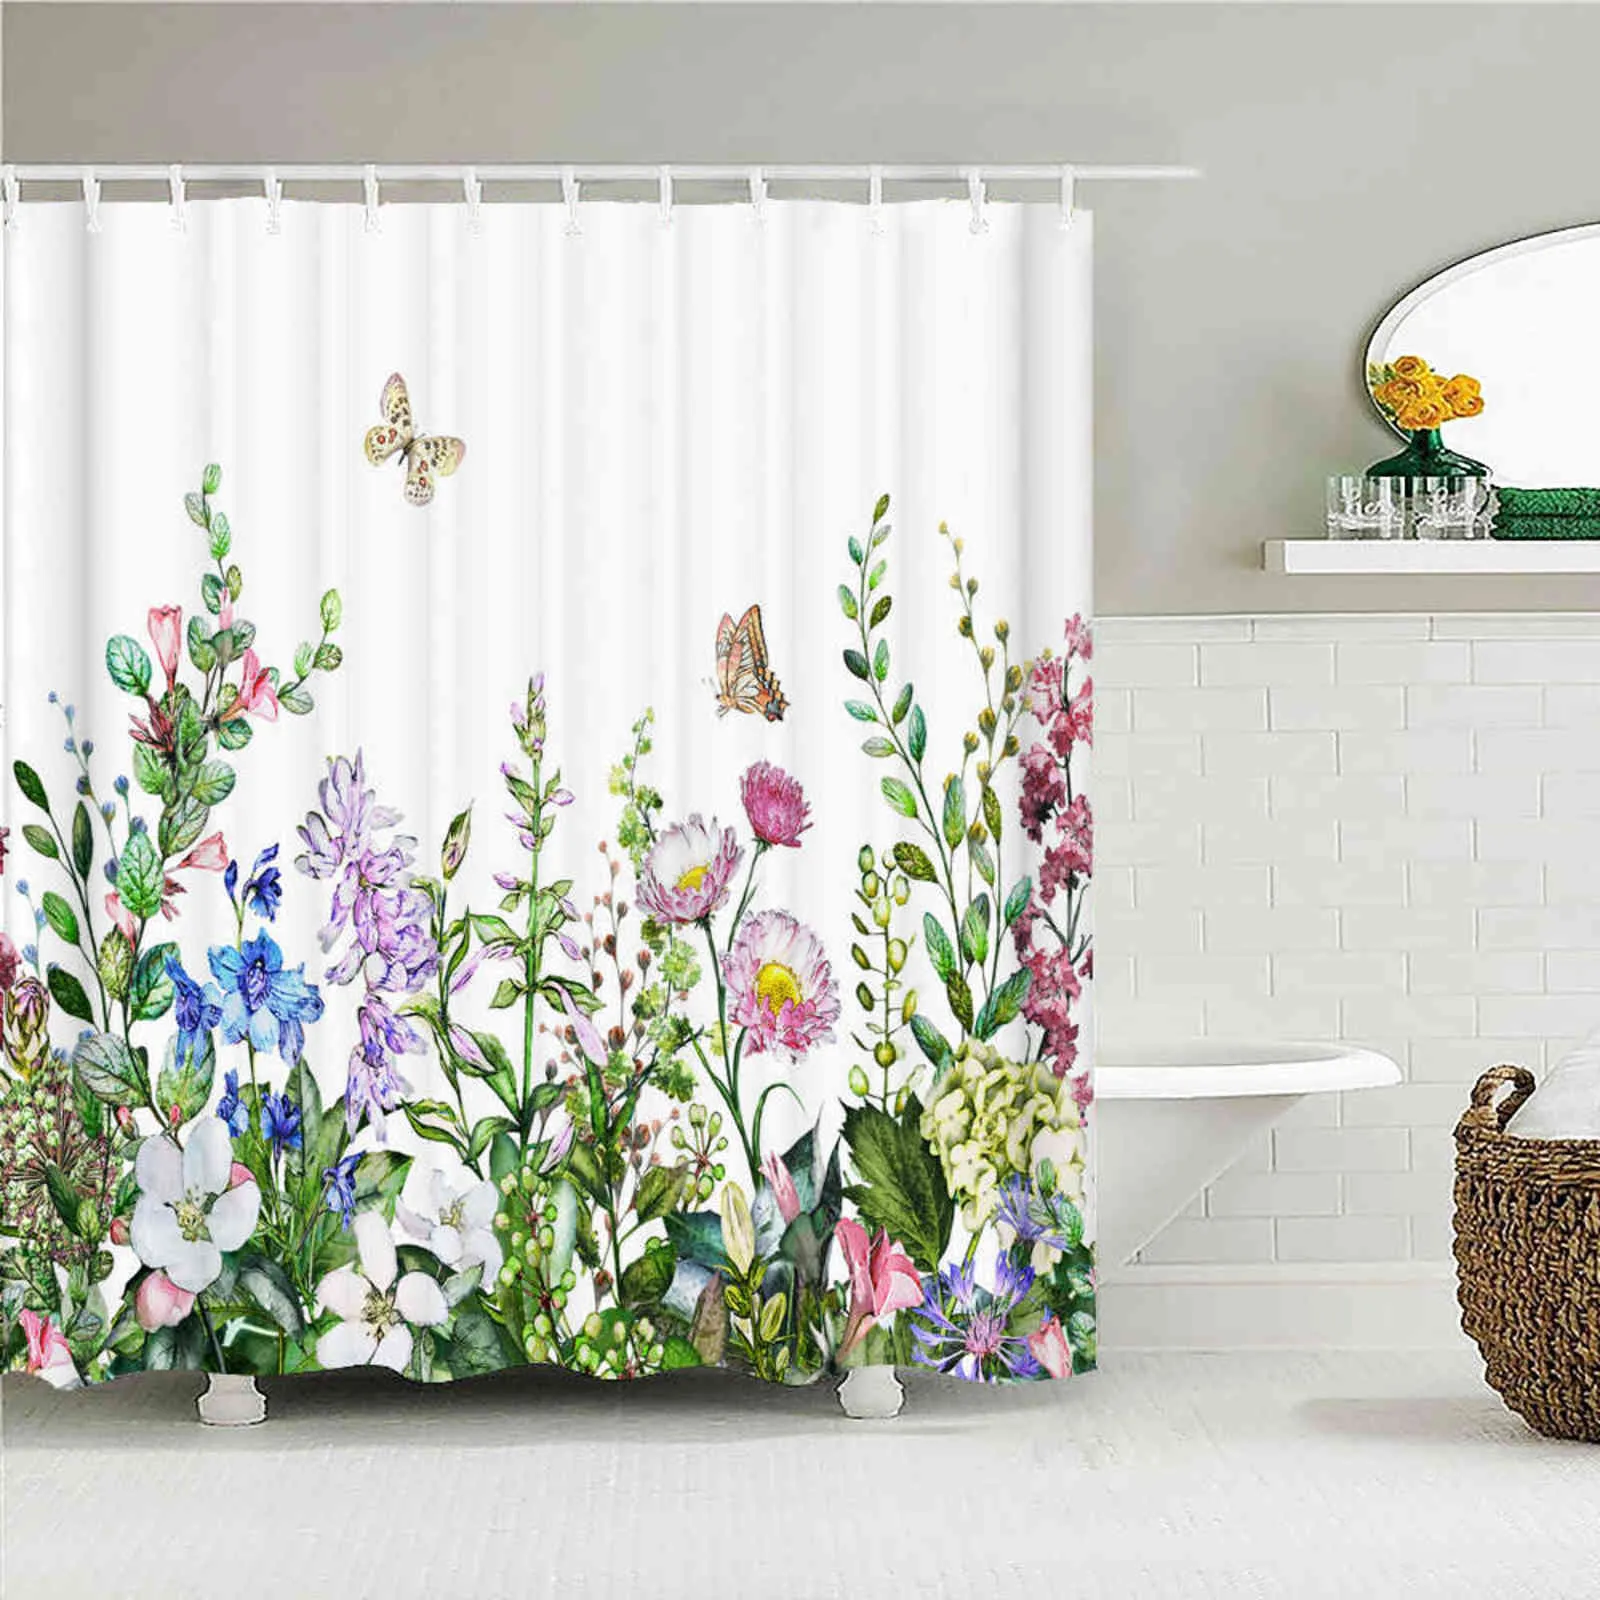 Waterproof 3D Butterfly Feather Butterfly Shower Curtain With